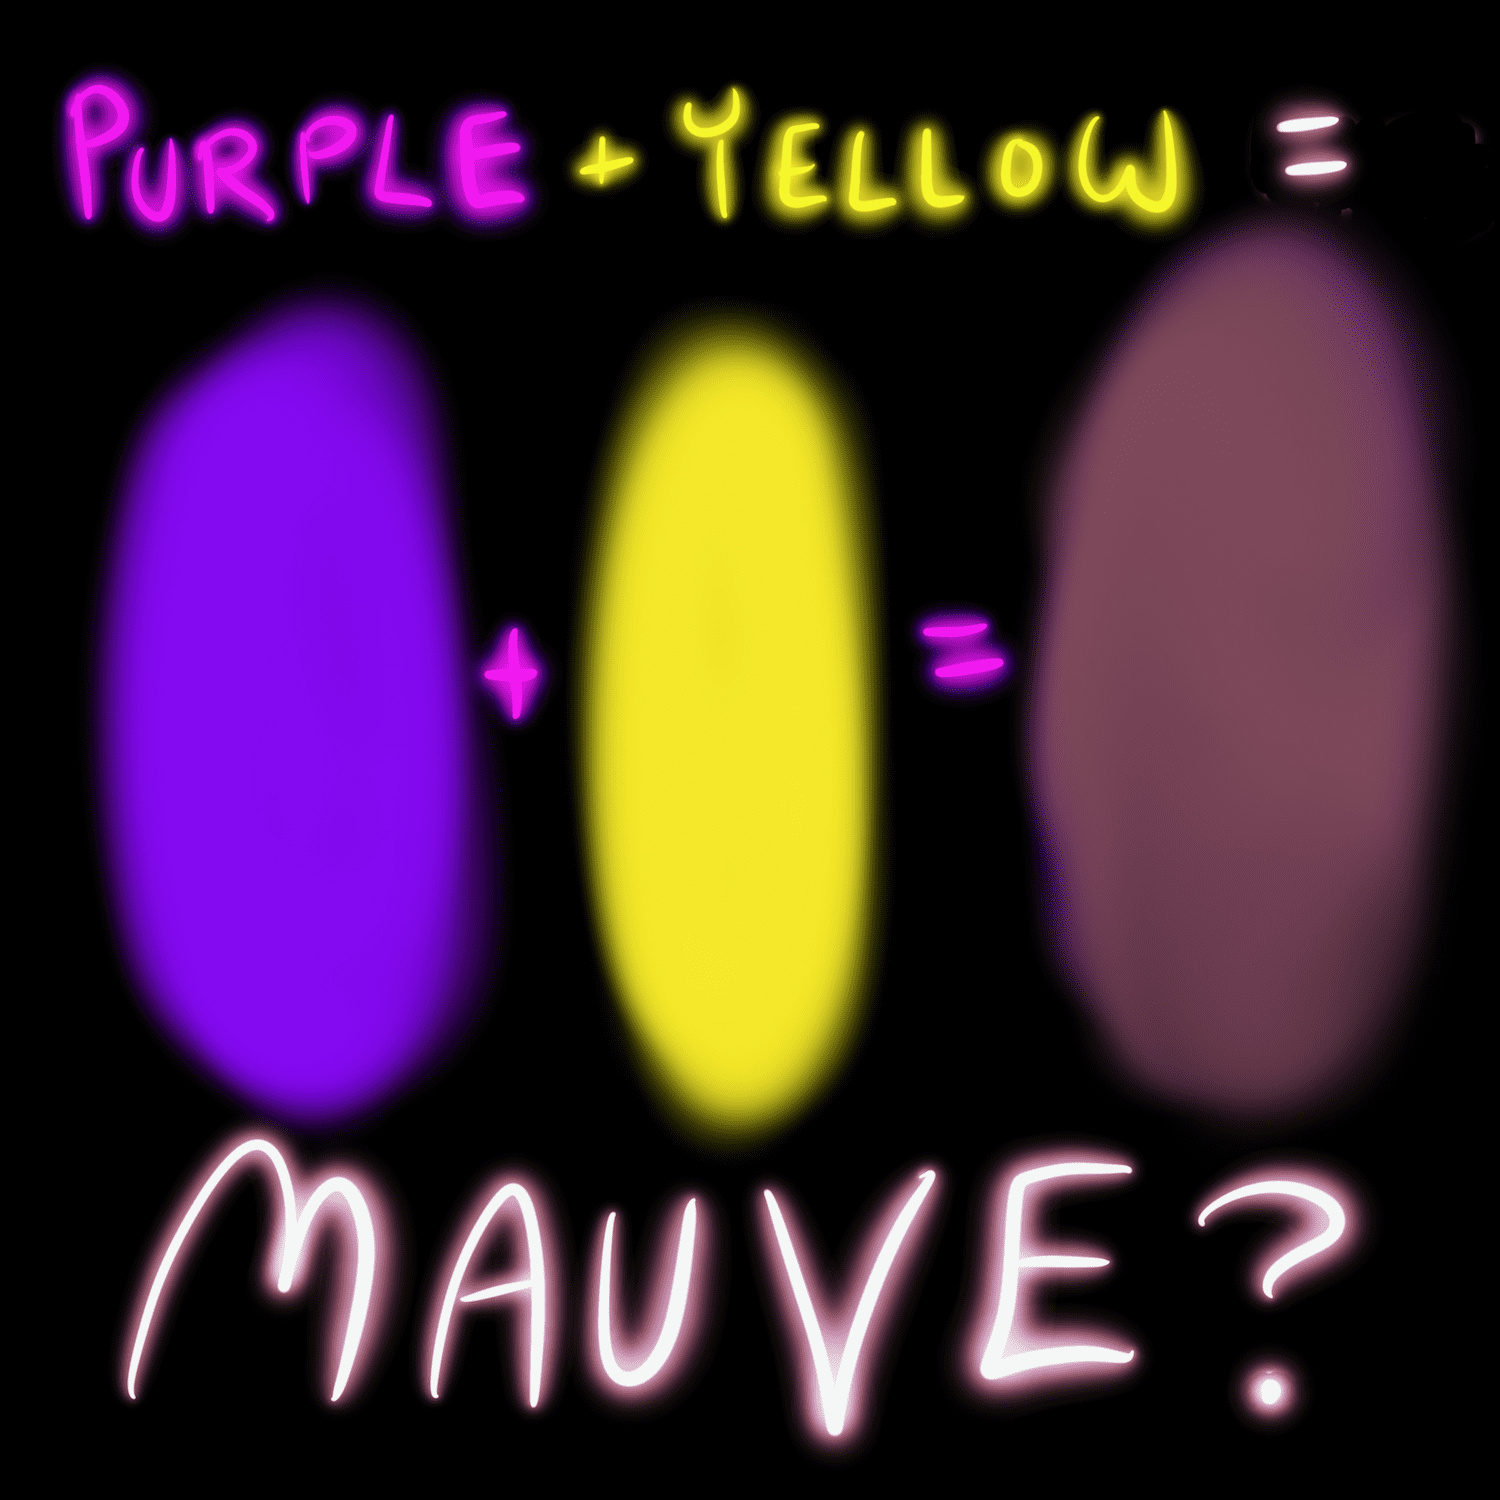 What do yellow and purple make?